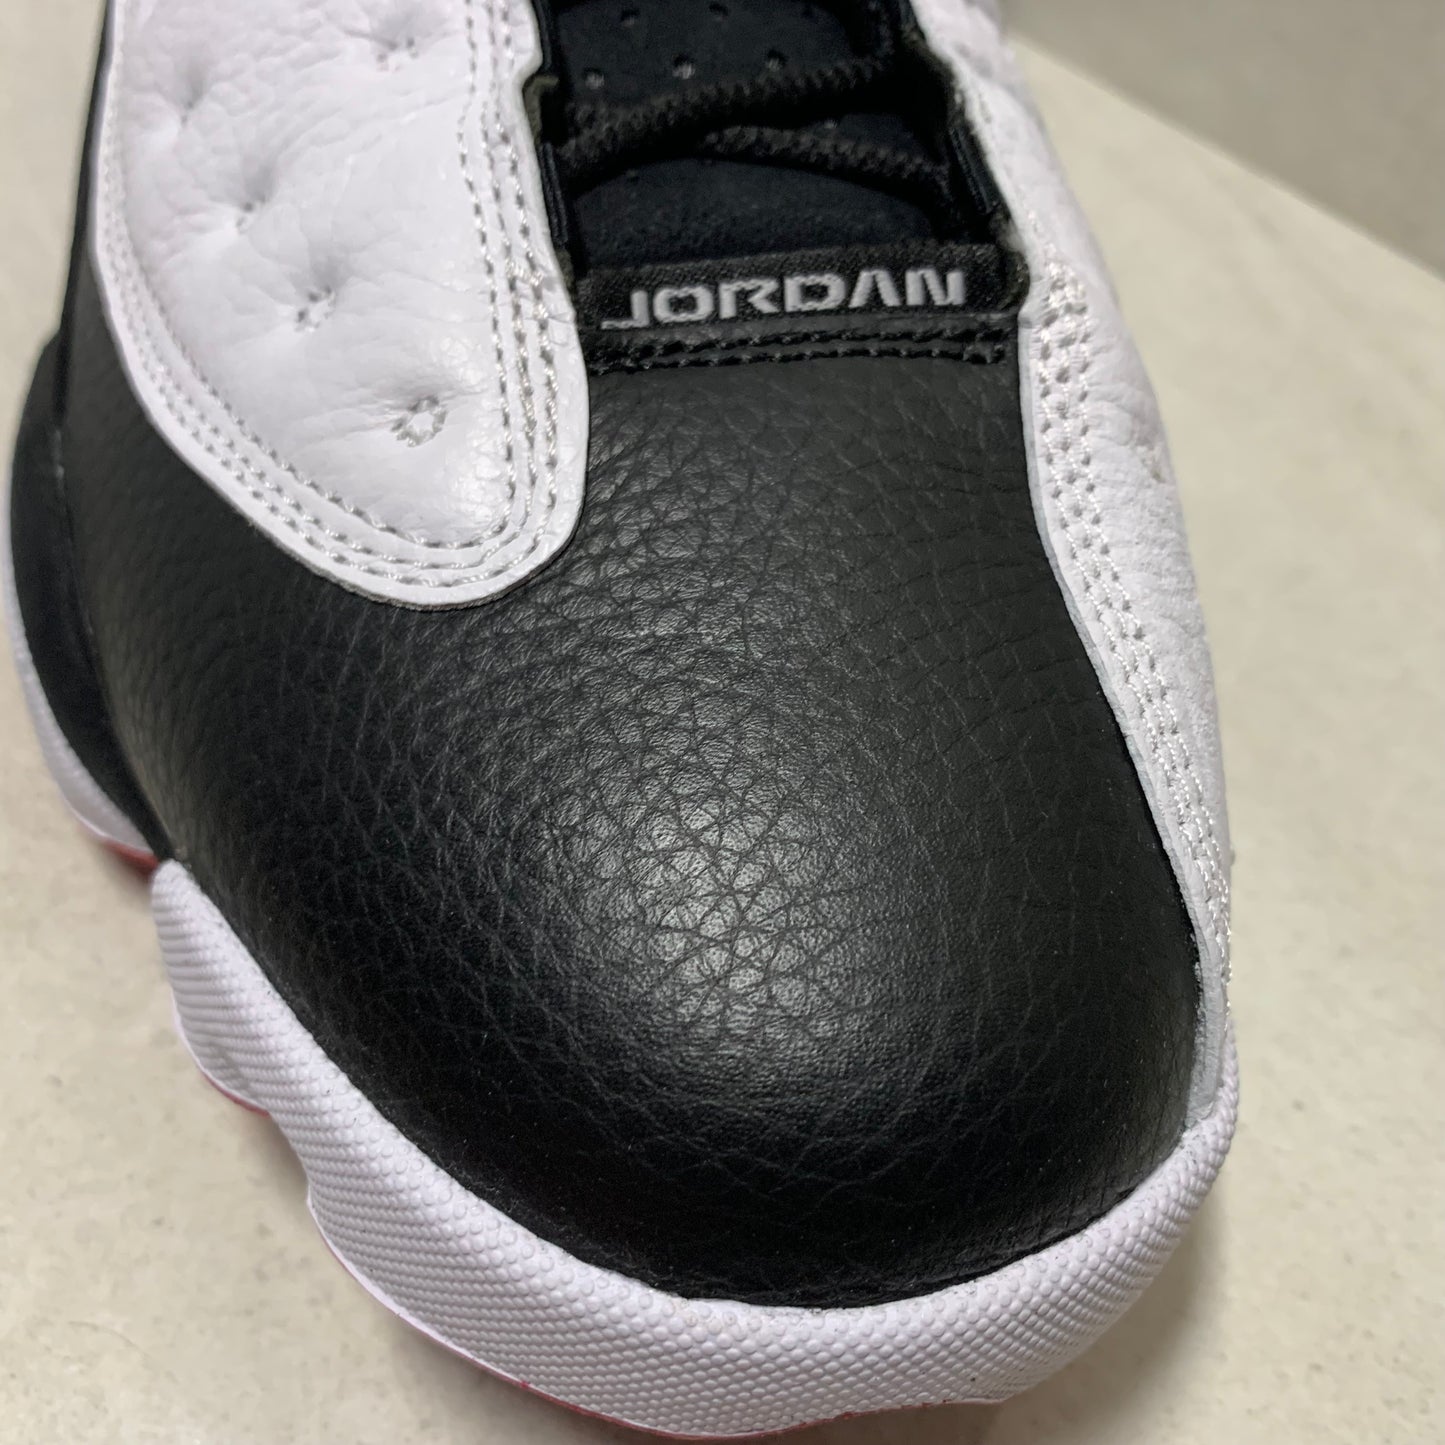 NIKE AIR JORDAN 13 XIII RETRO HE GOT GAME 414571-104 TAILLE 7.5/TAILLE 12.5/TAILLE 16